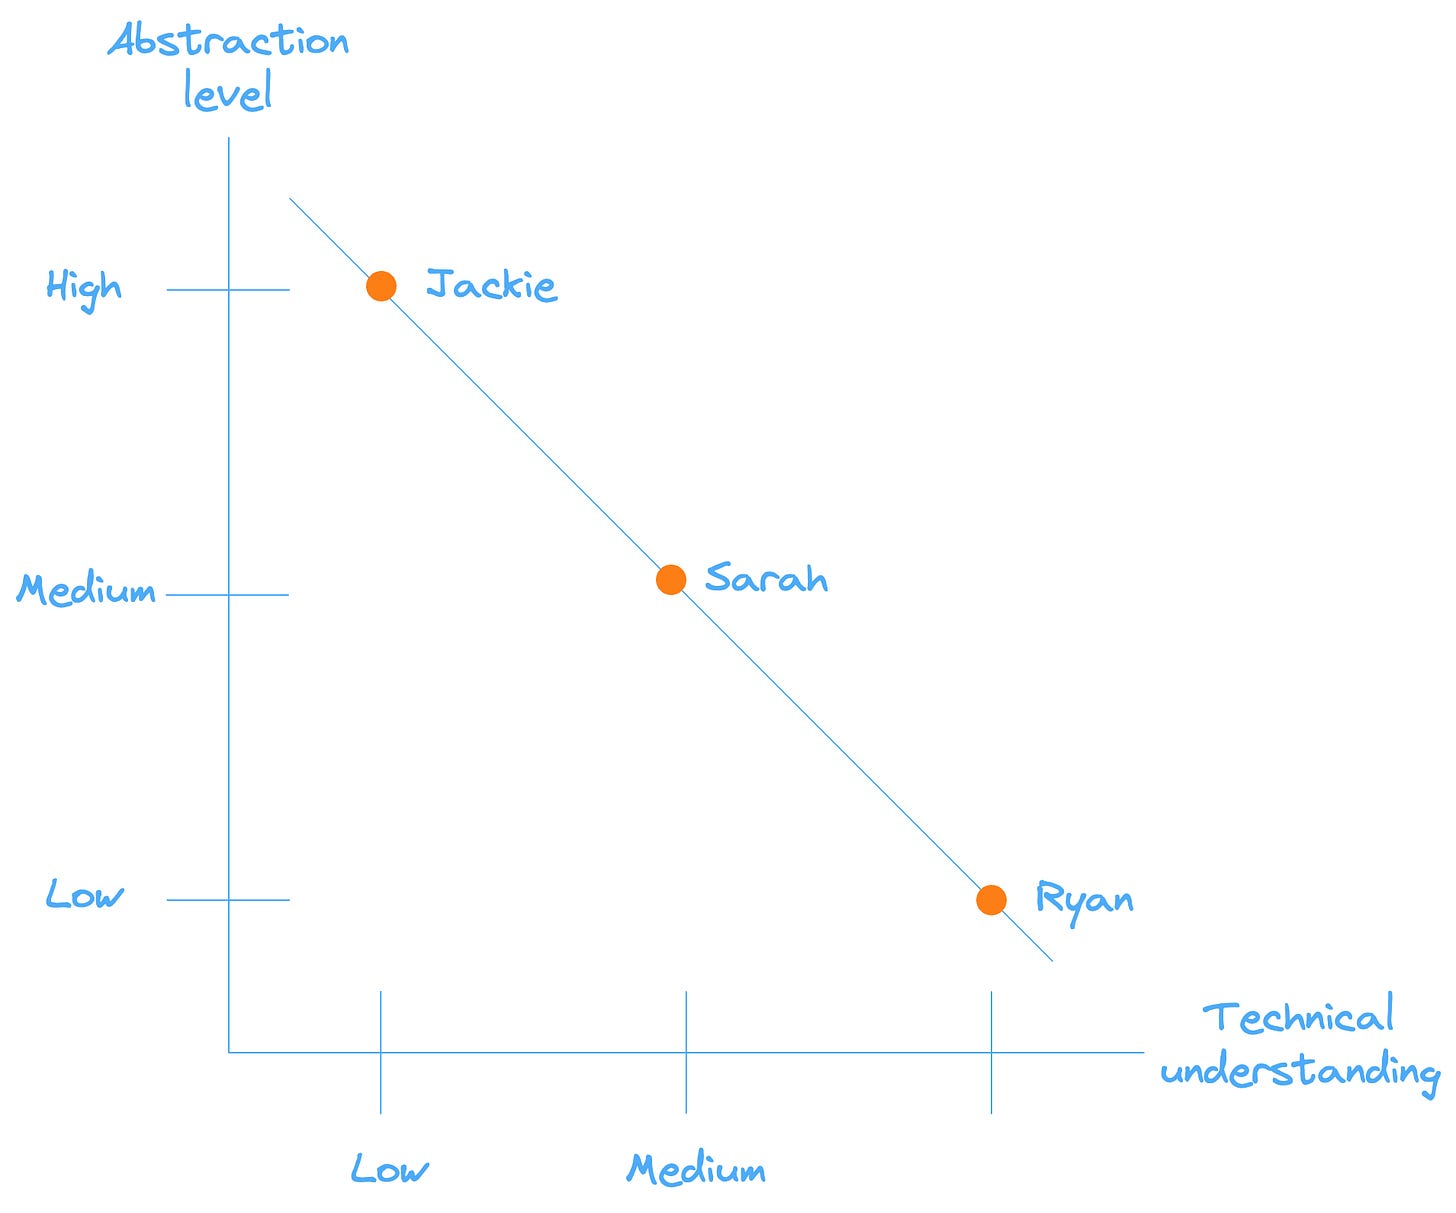 data engineering; technical undersanding to abstraction level graph; non-technical people